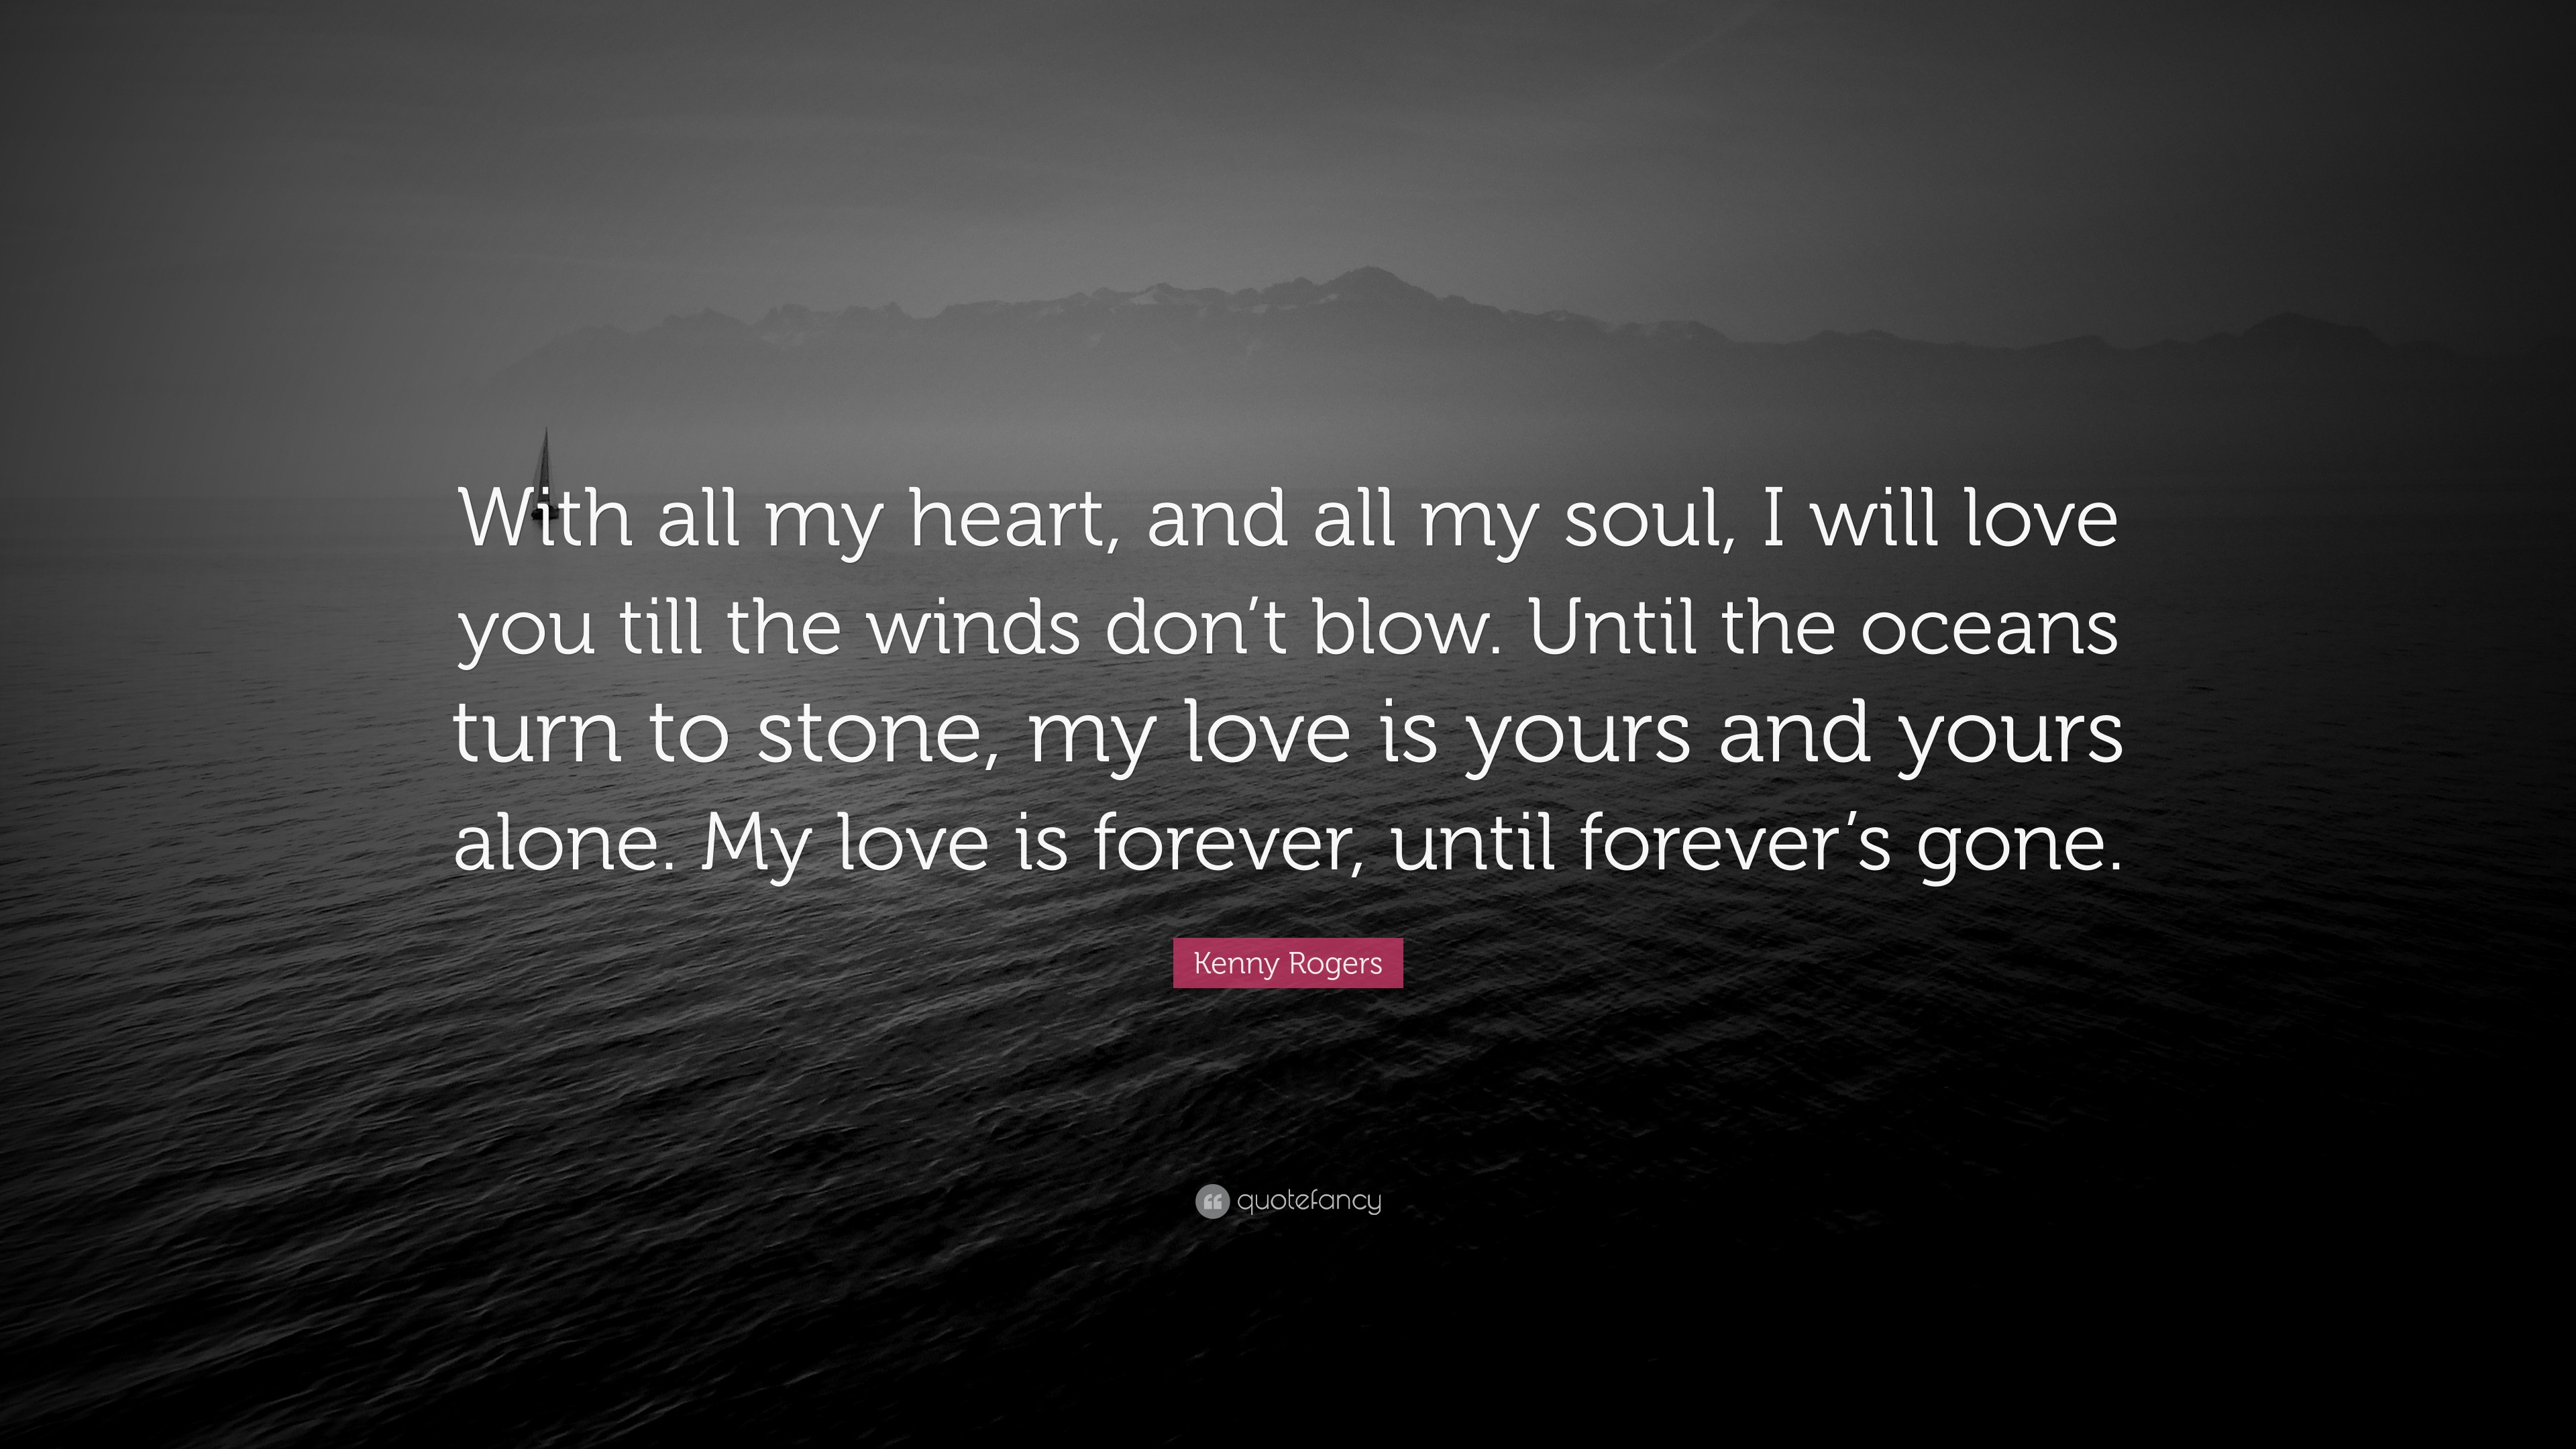 Kenny Rogers Quote “With all my heart and all my soul I